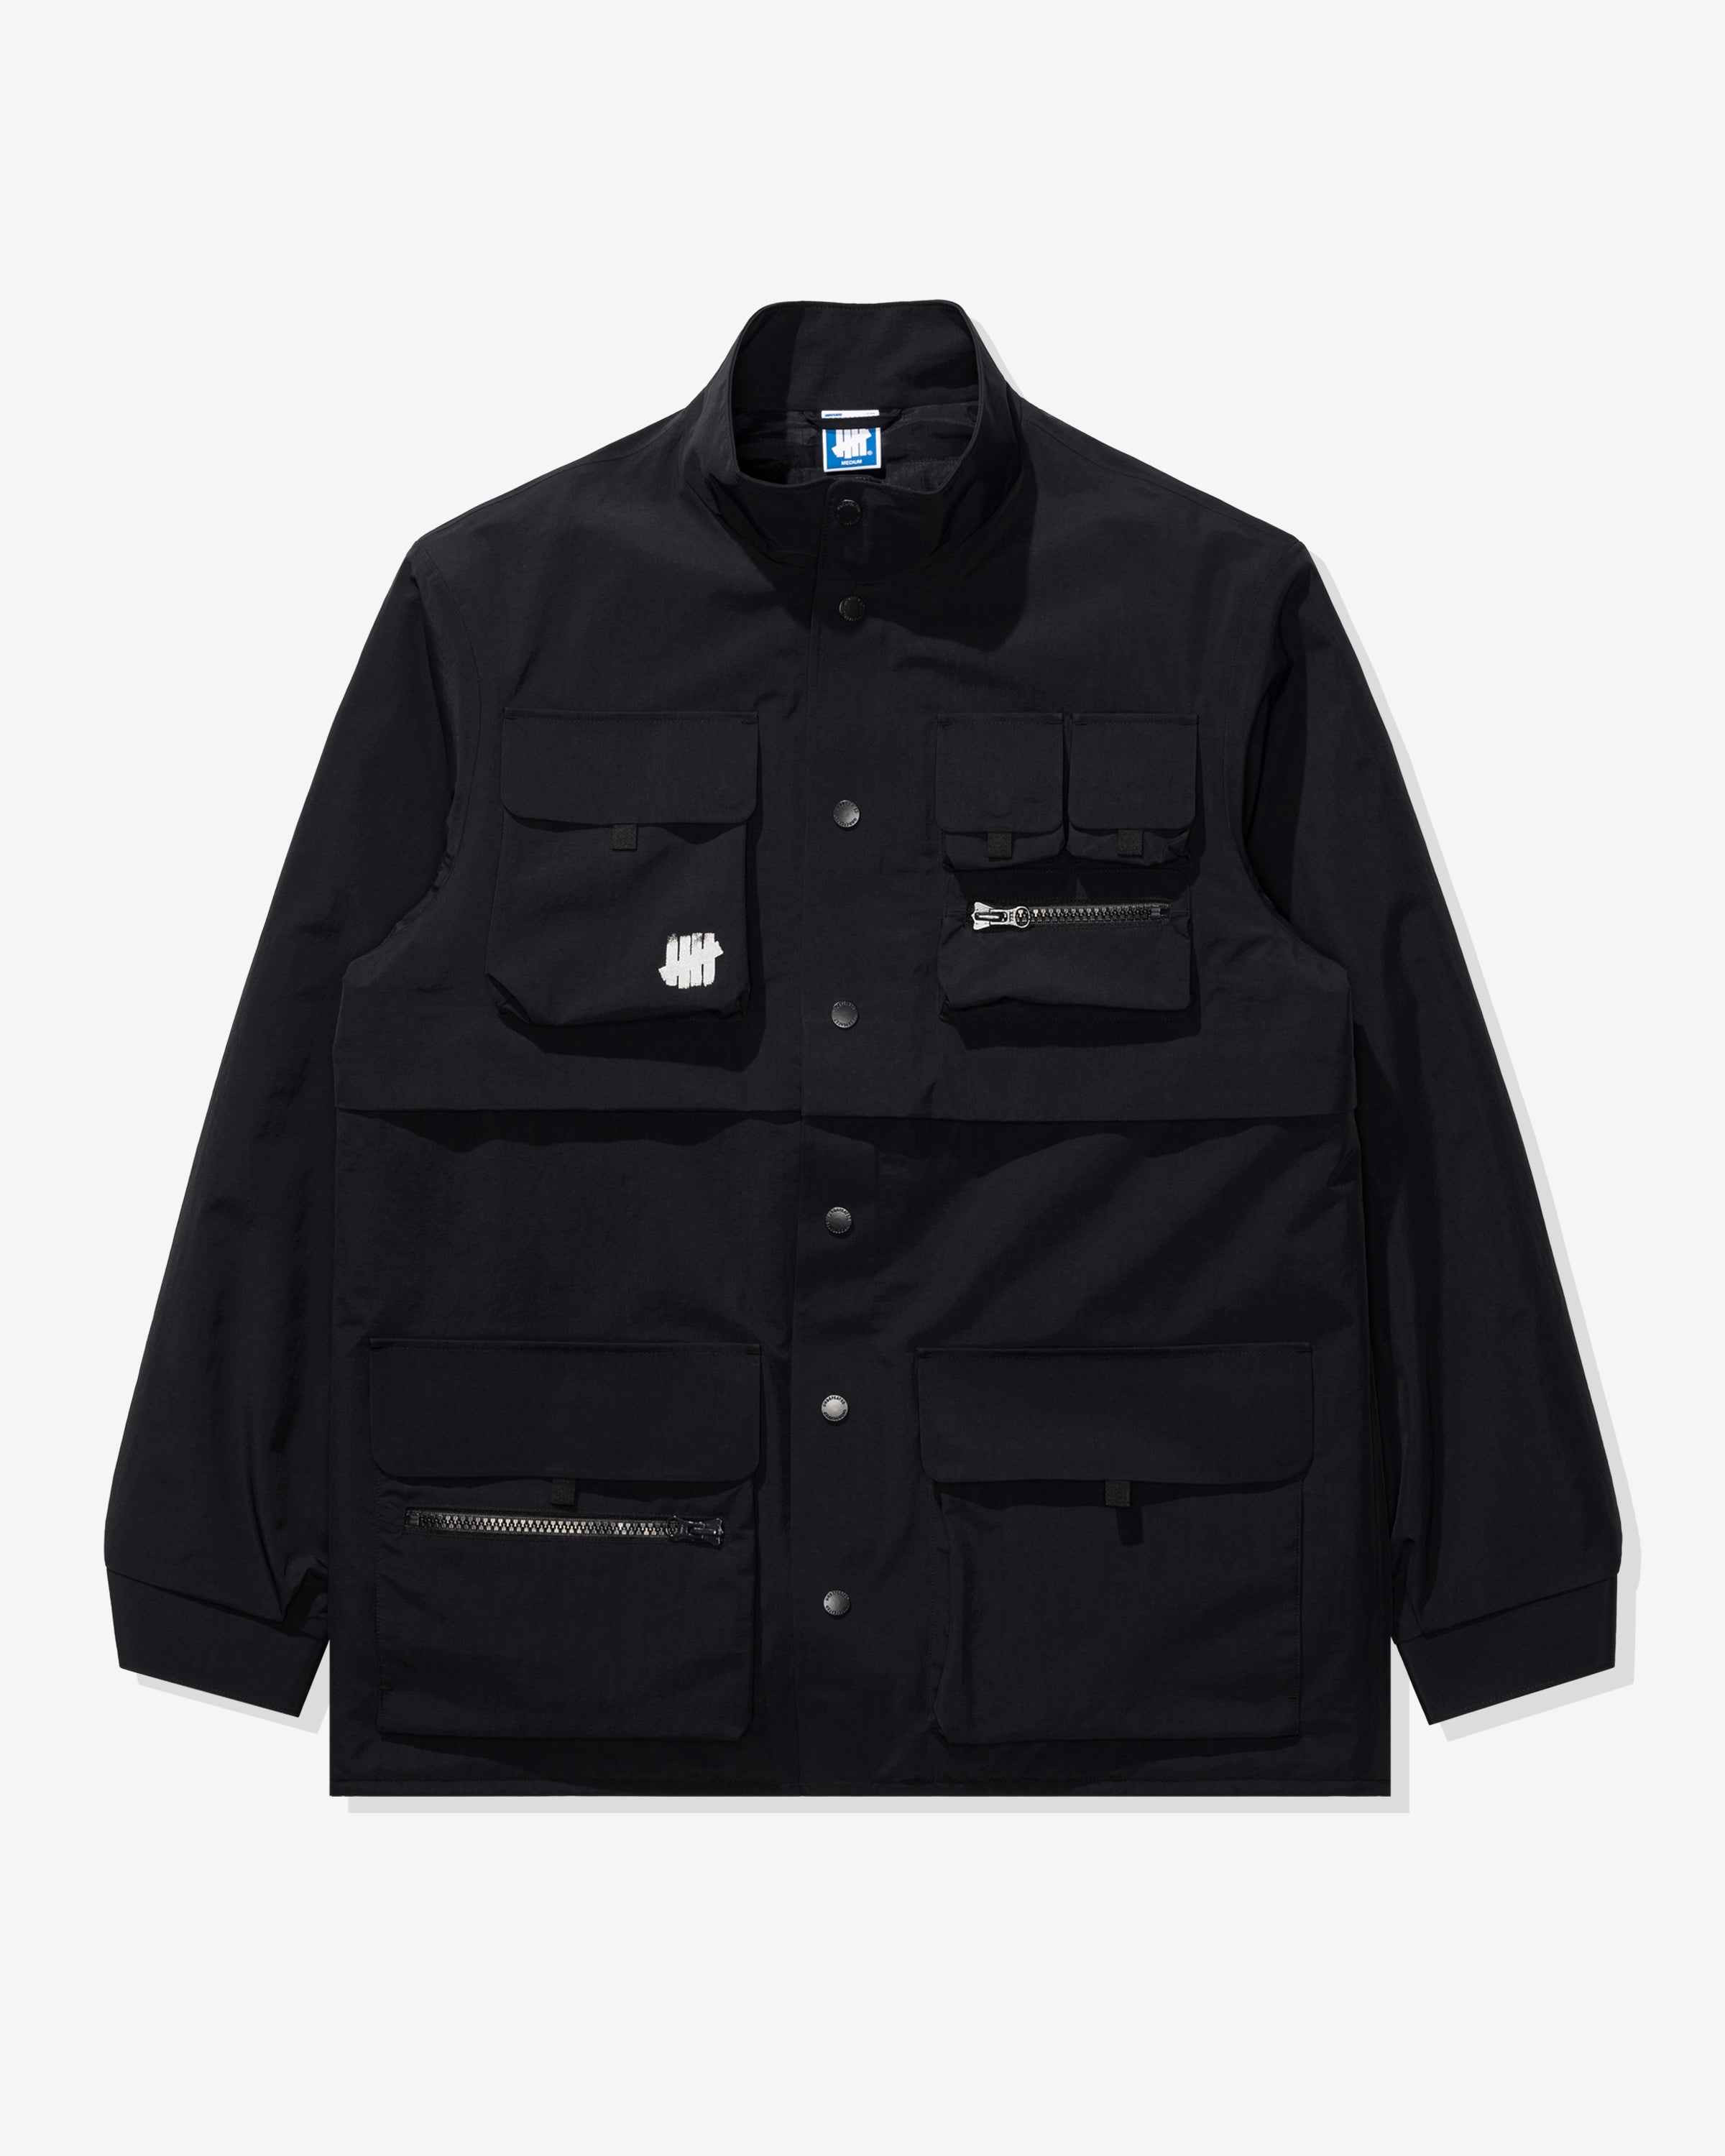 UNDEFEATED TECH M65 JACKET